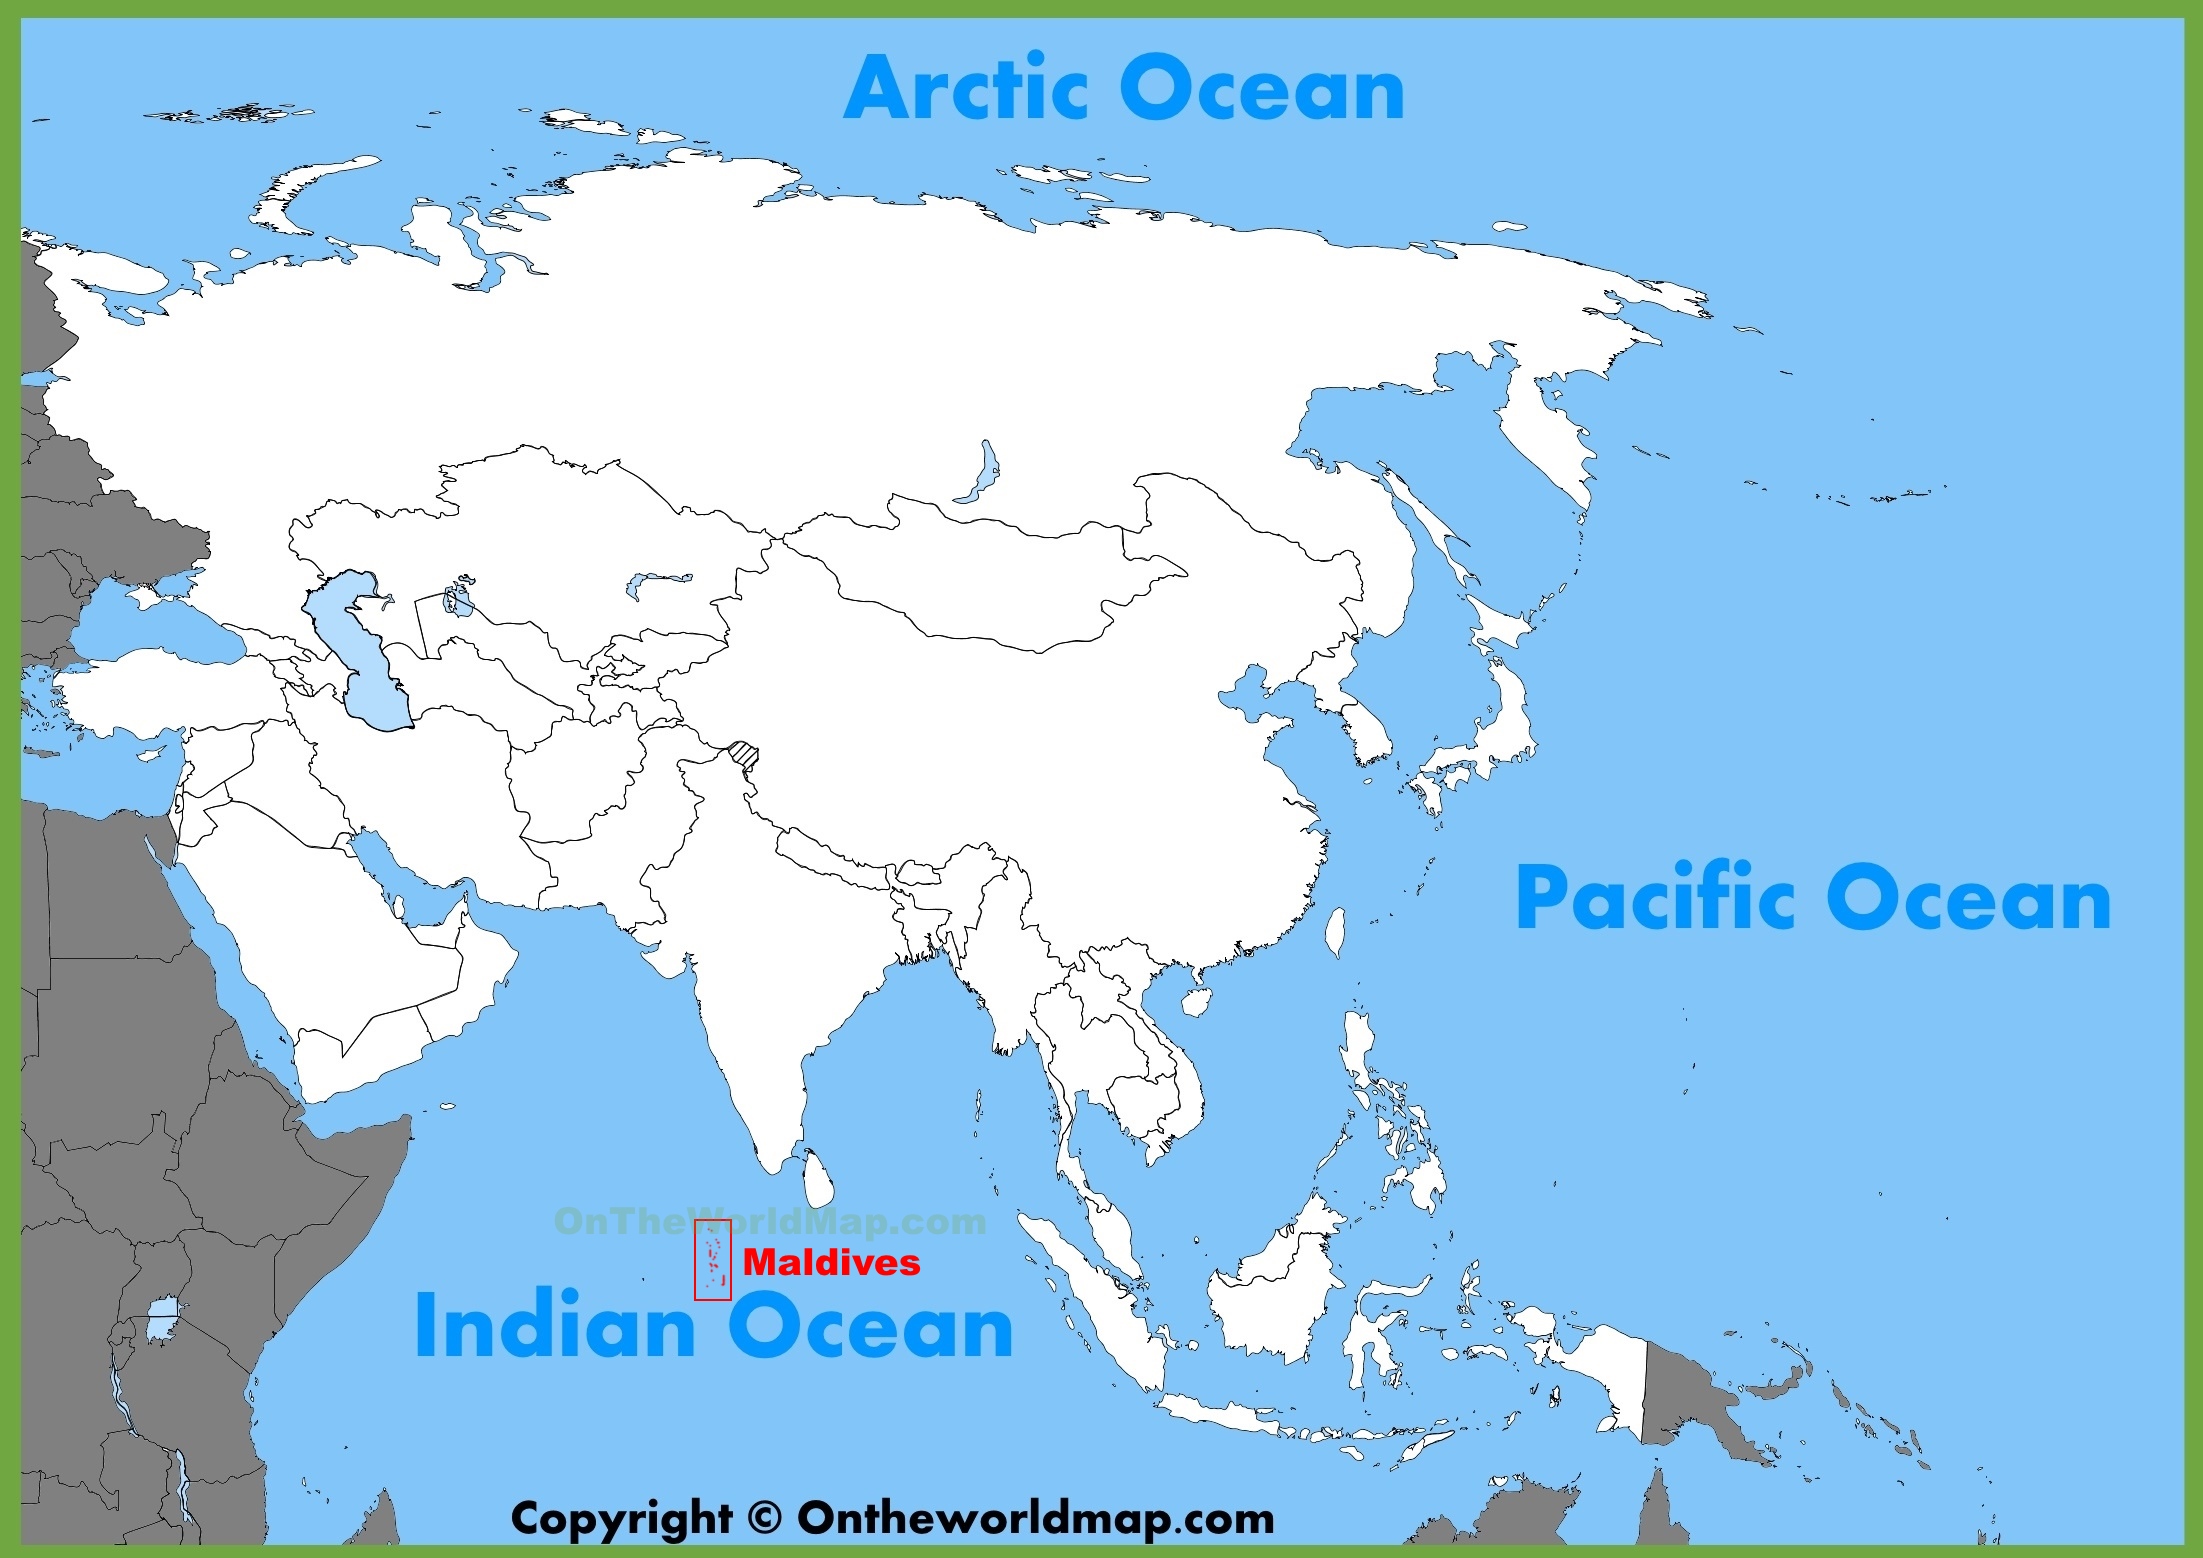 Maldives Location On The Asia Map